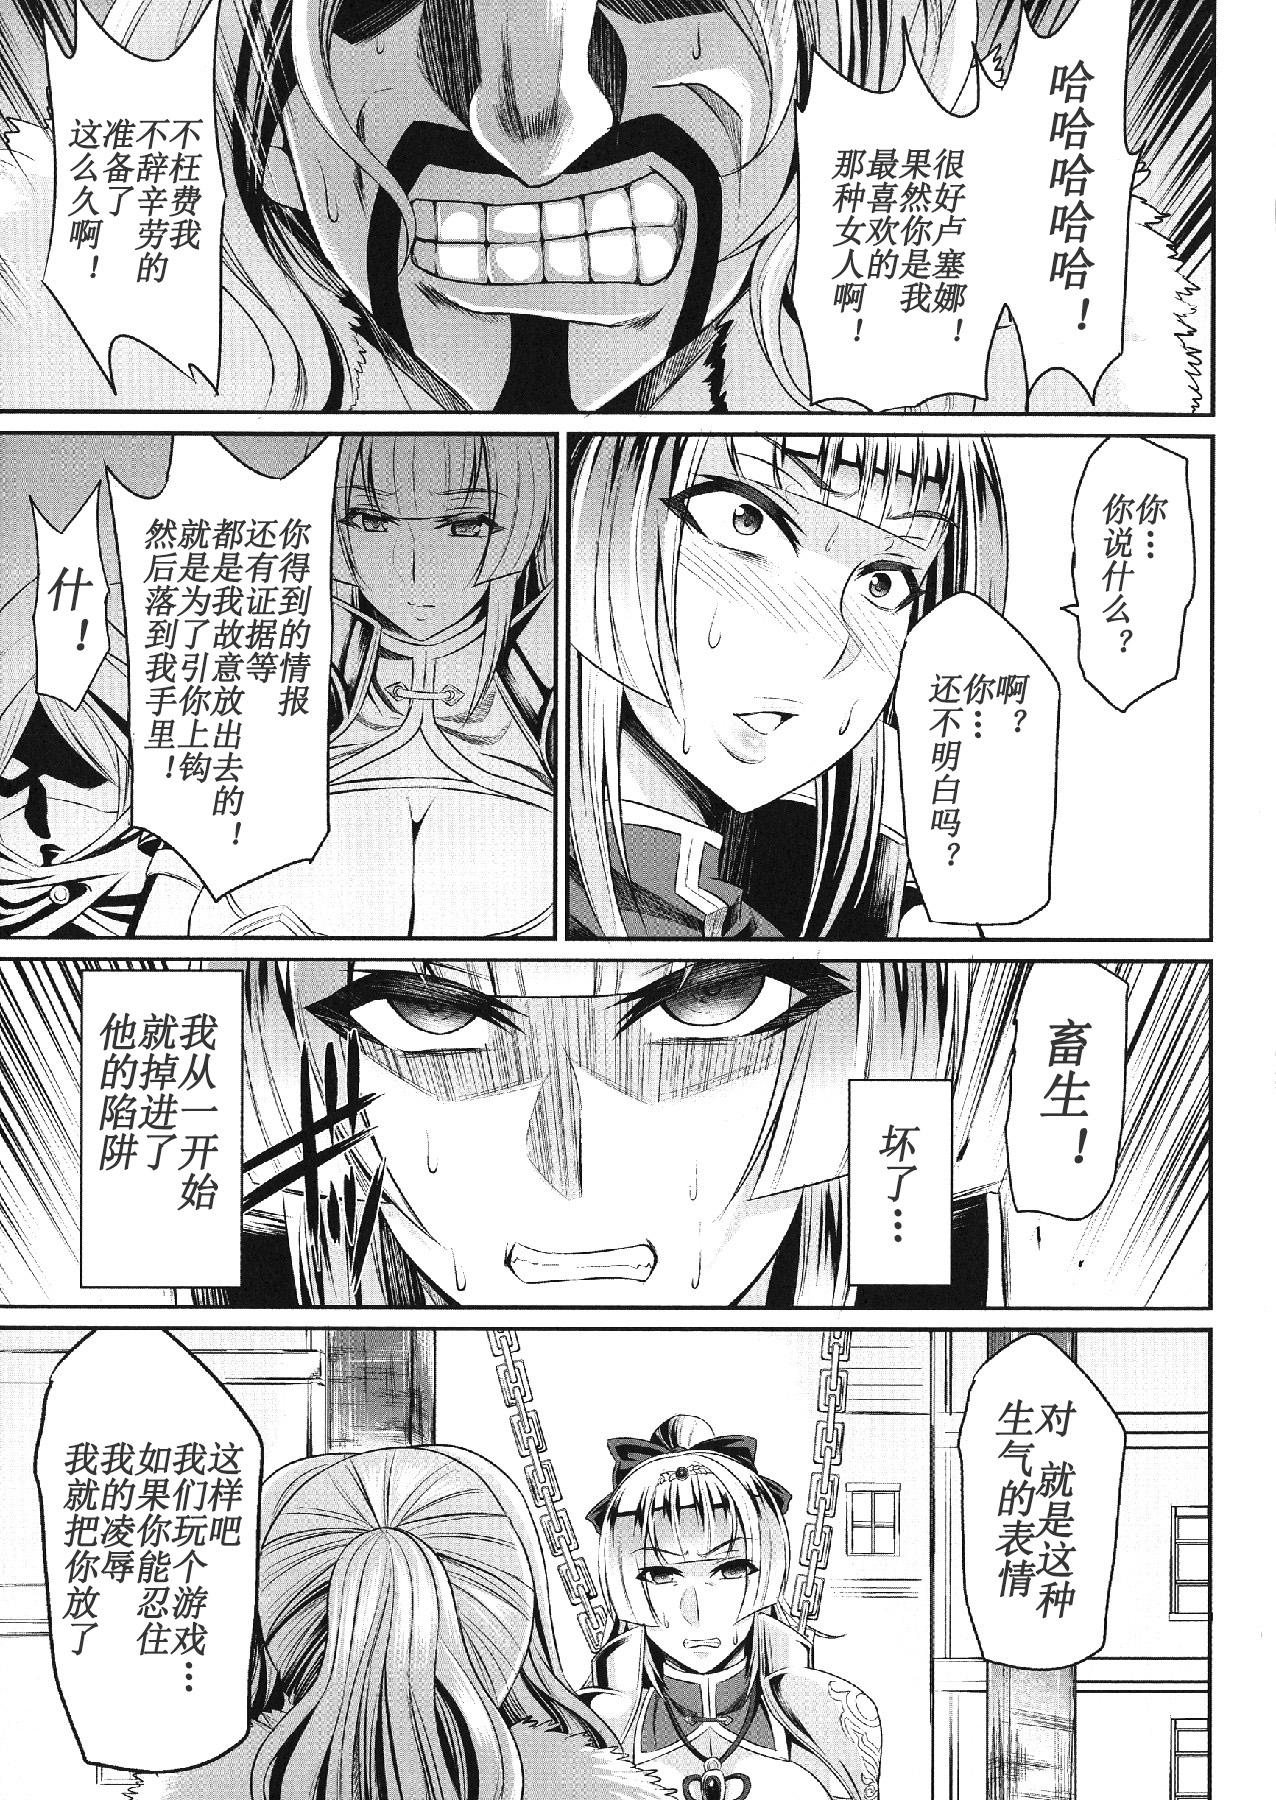 Dykes Knights fall〜女騎士は恥辱に堕ちる〜 Nut - Page 9